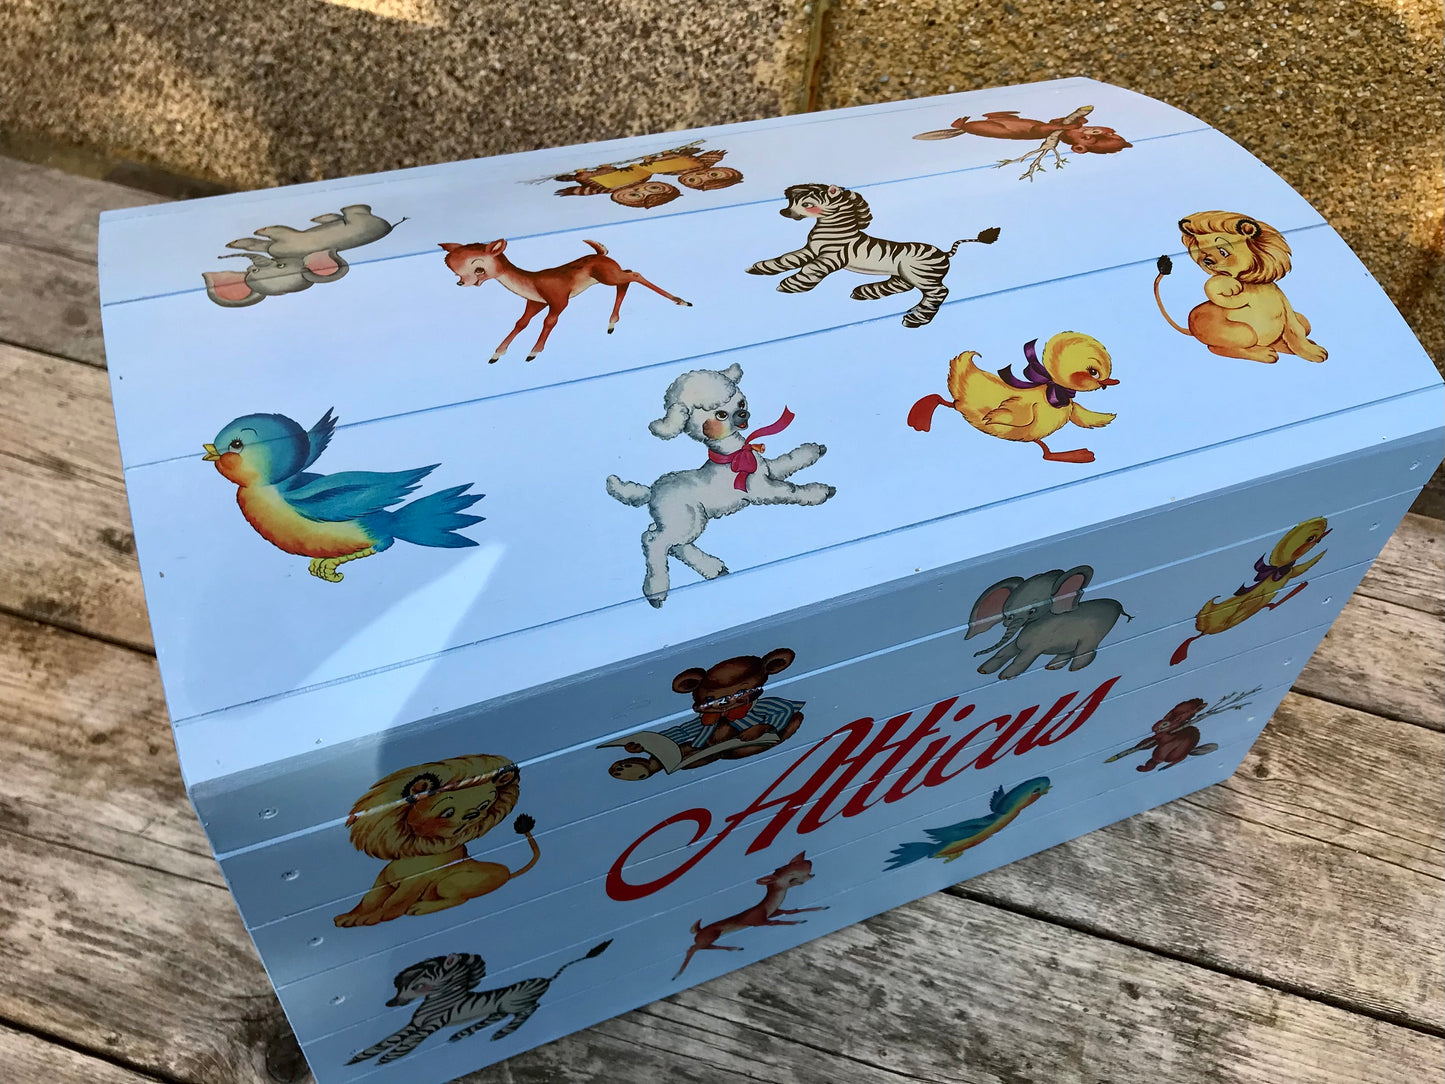 Commission for Harry -  personalised children's toy box